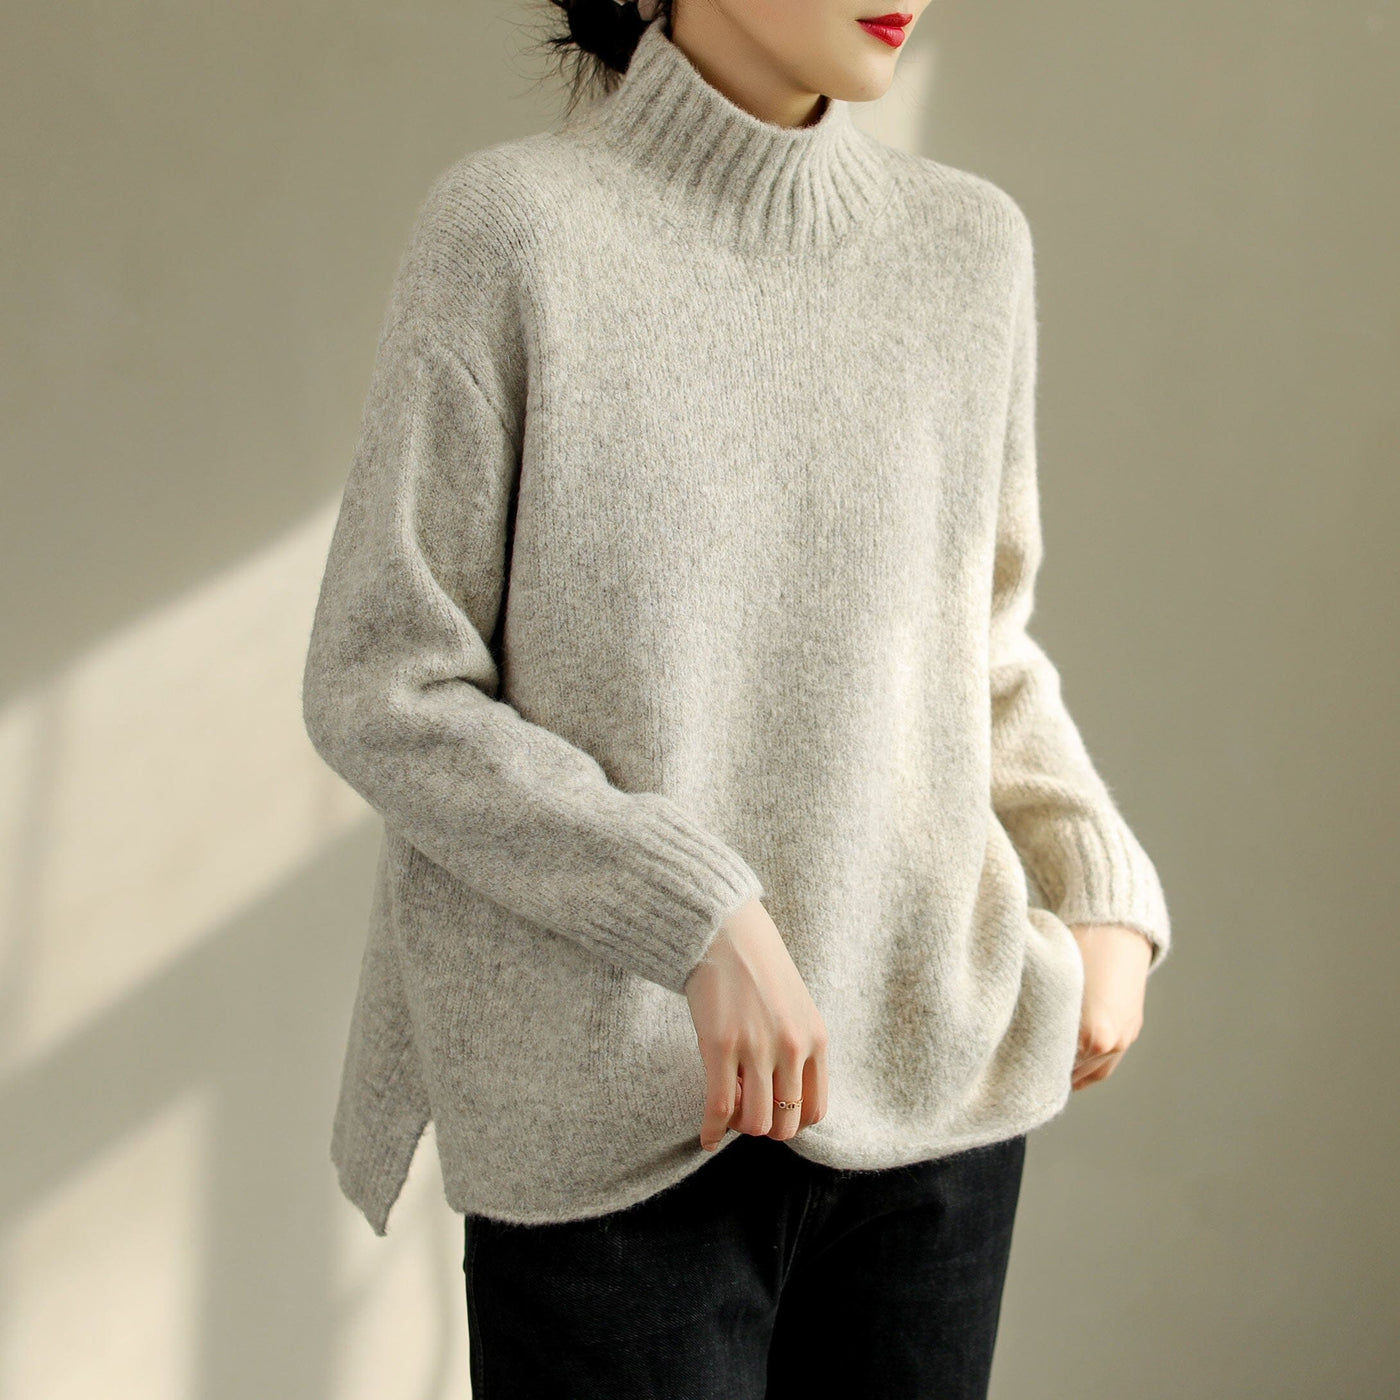 Women Autumn Winter Cotton Knitted Elastic Sweater Nov 2022 New Arrival One Size Light Gray 